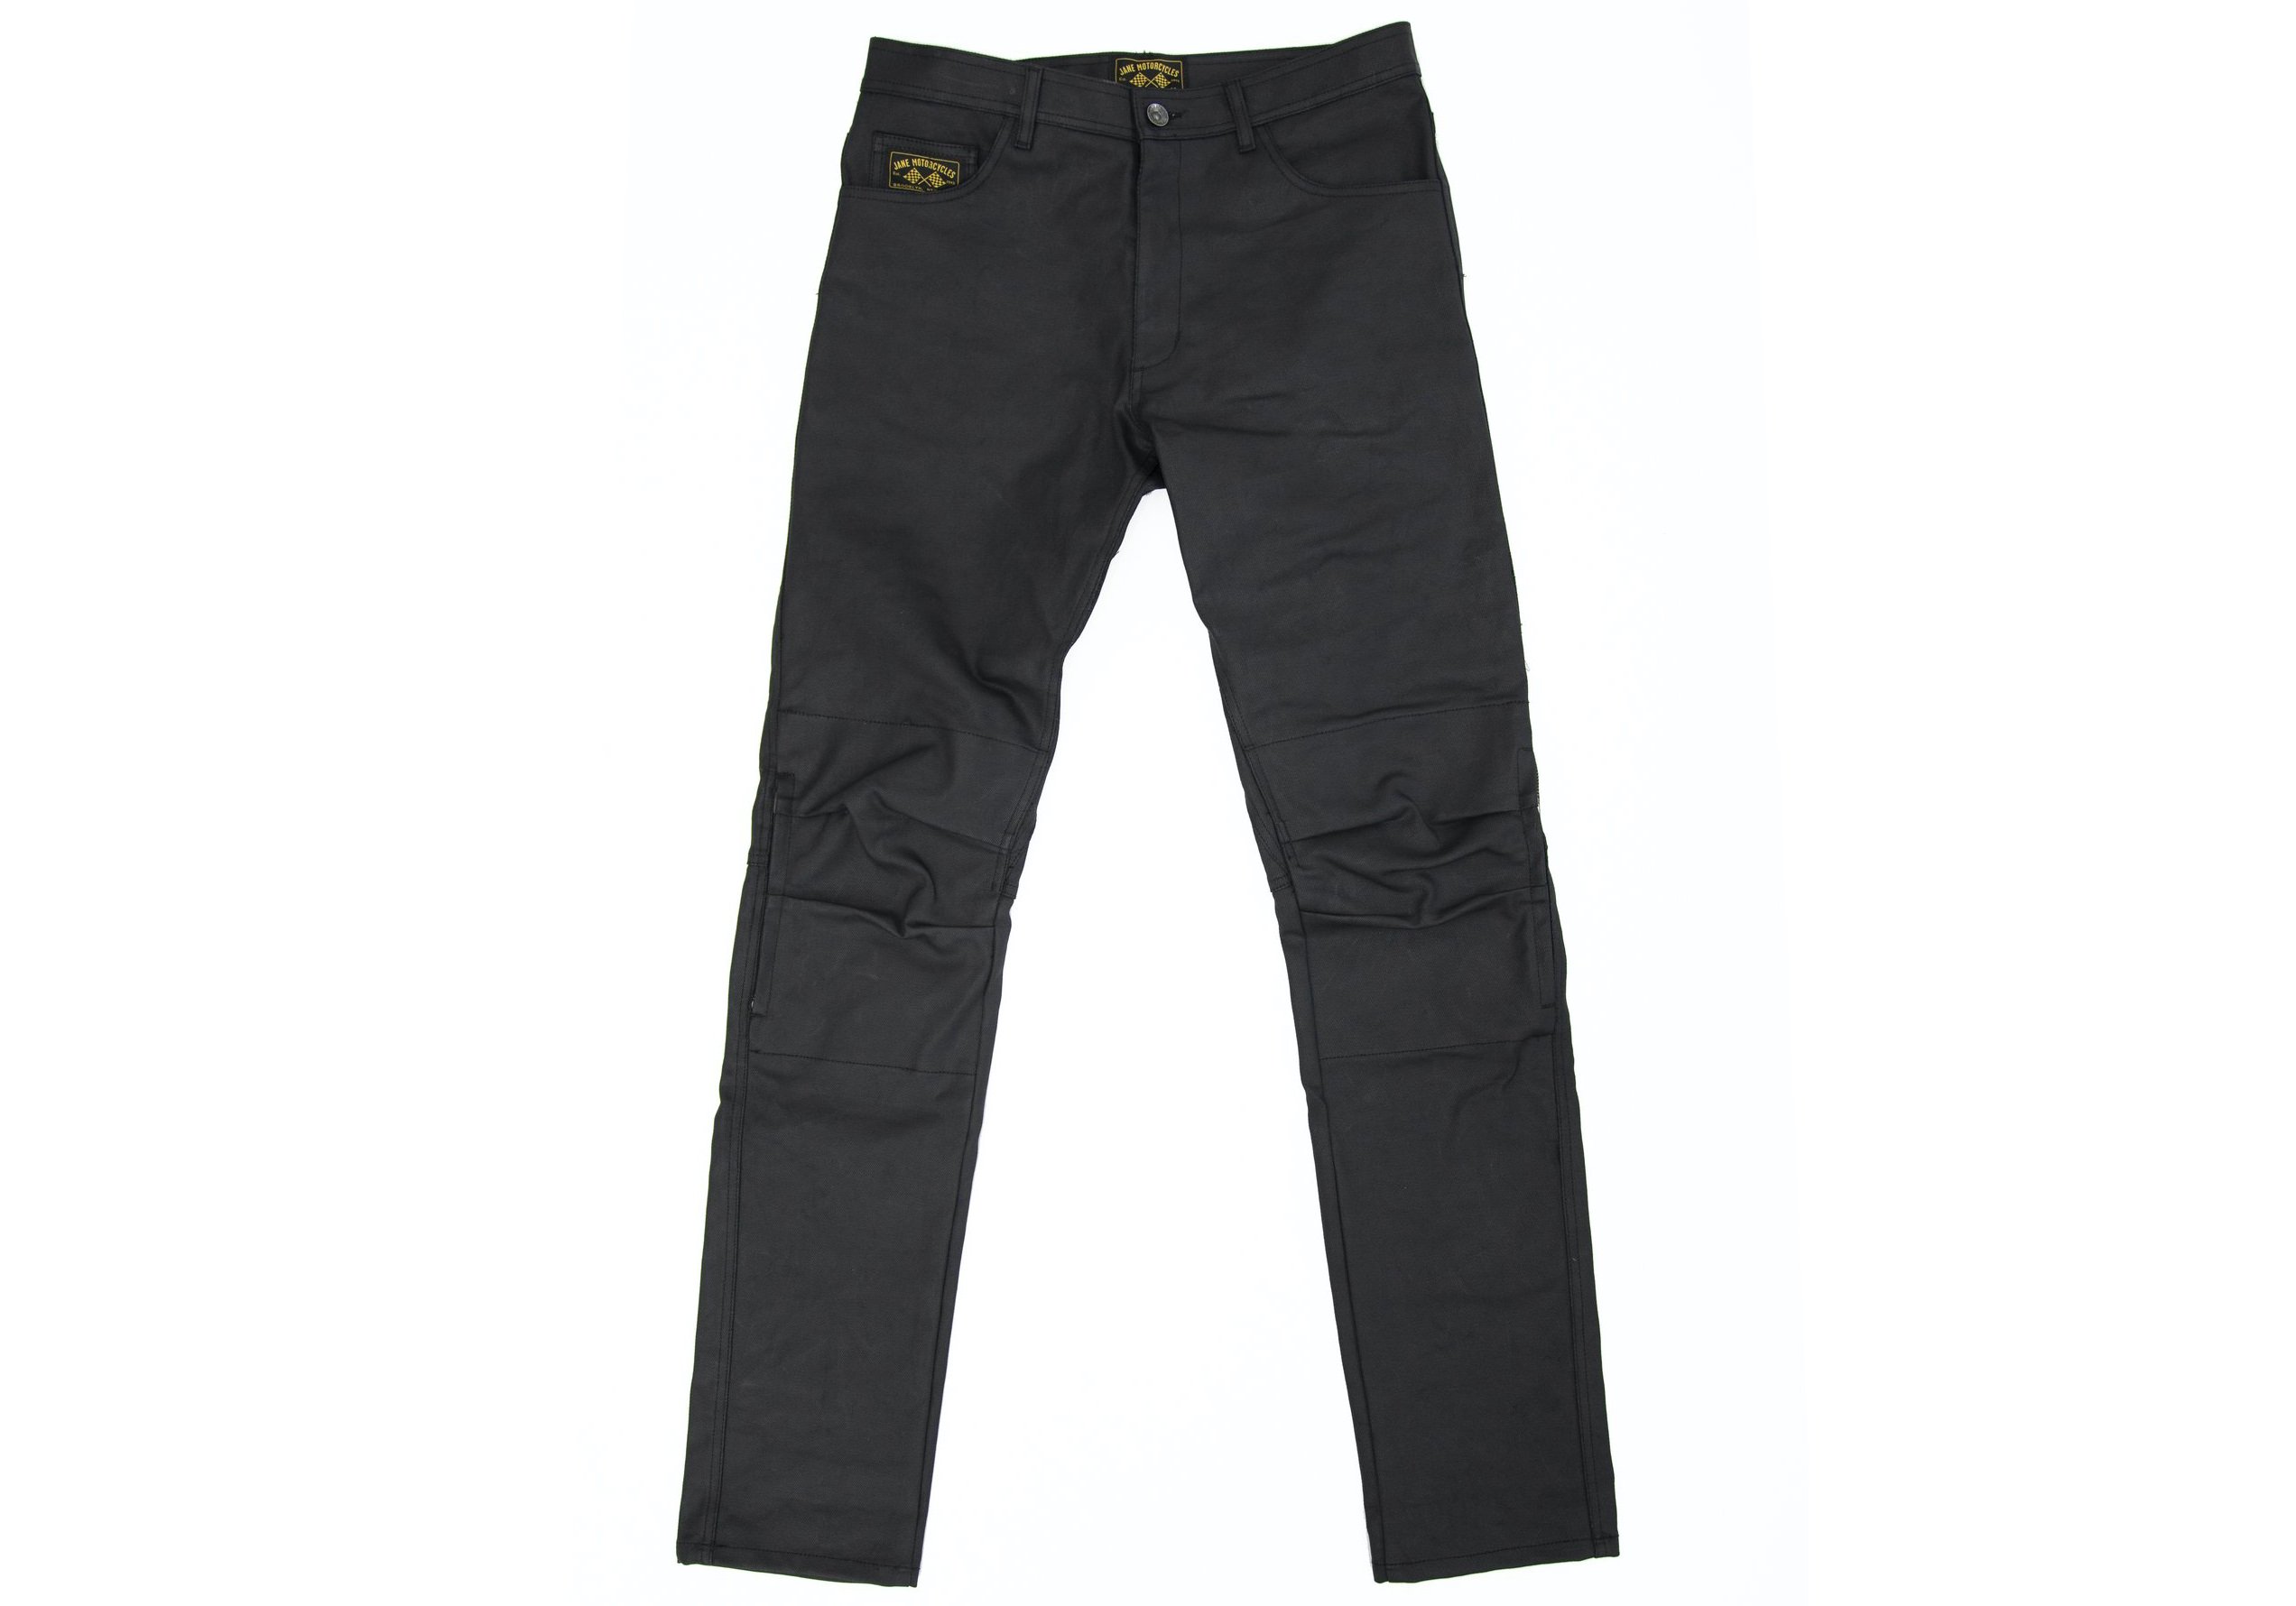 Norman Armalith Riding Pants By Jane Motorcycles